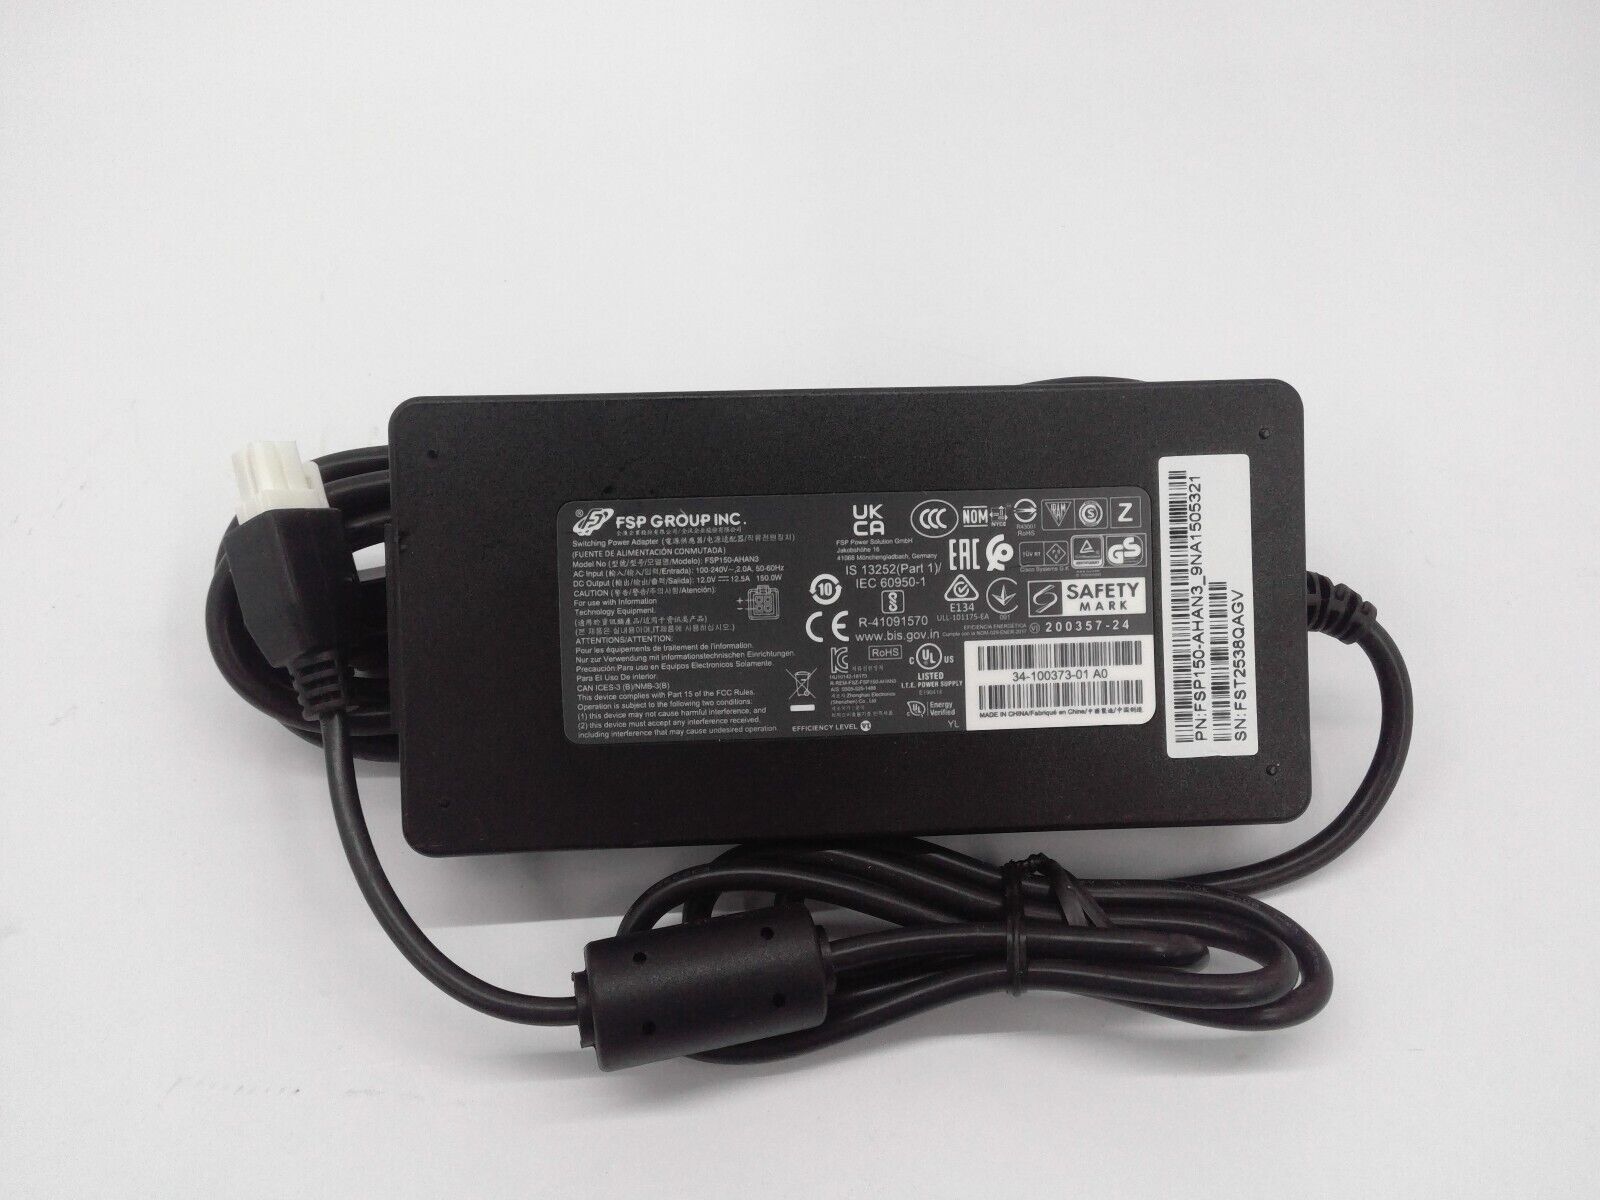 Genuine  FSP GROUP 150W 12V 12.5A  4 Pin  FSP150-AHAN3 Laptop Power Adapter